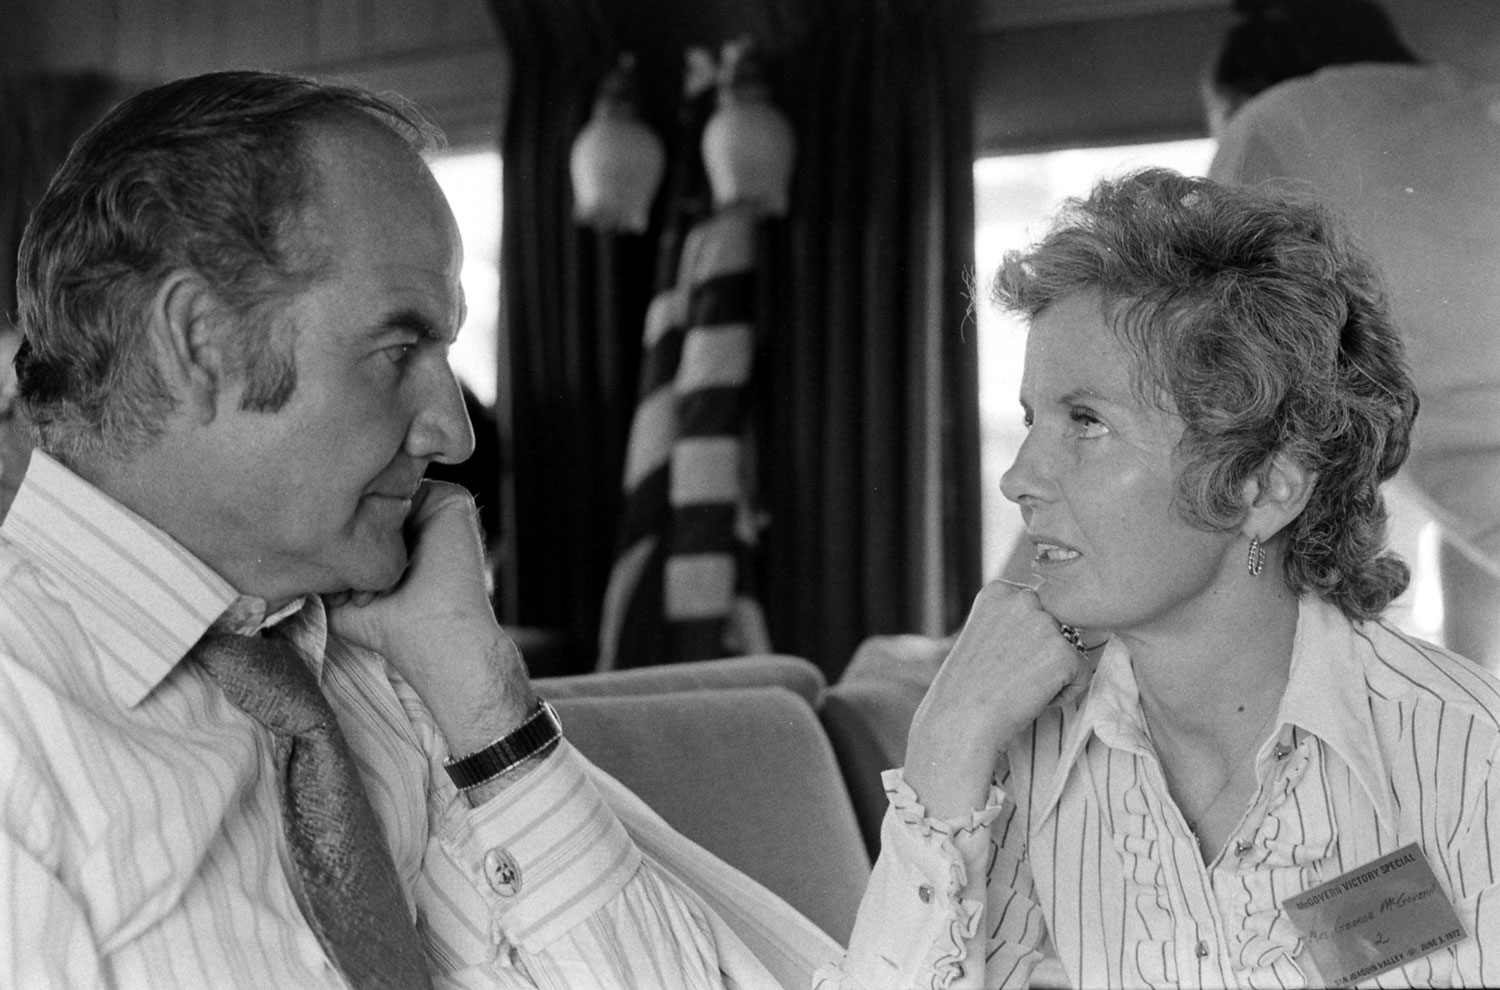 George McGovern and his wife, Eleanor, during the 1972 presidential campaign.